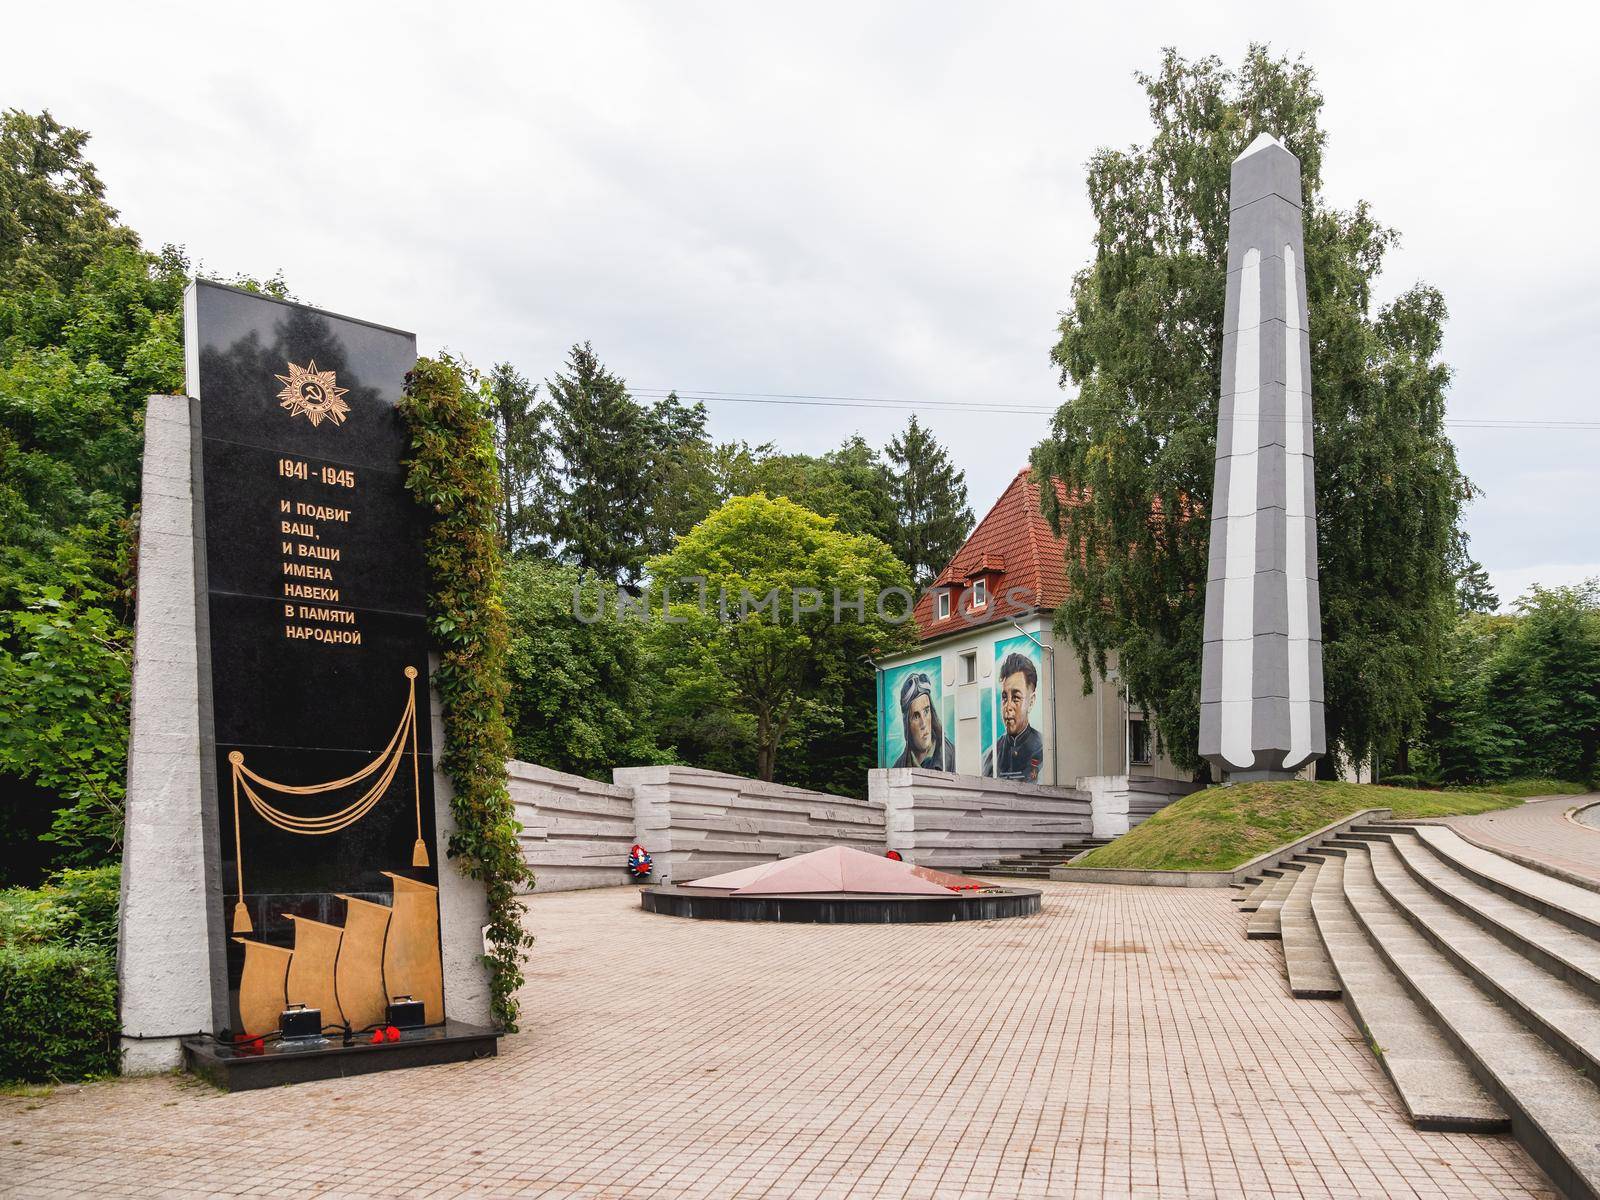 SVETLOGORSK, RUSSIA - July 21, 2019. Second World War memorial to war heroes. Monument and graffiti on house wall.